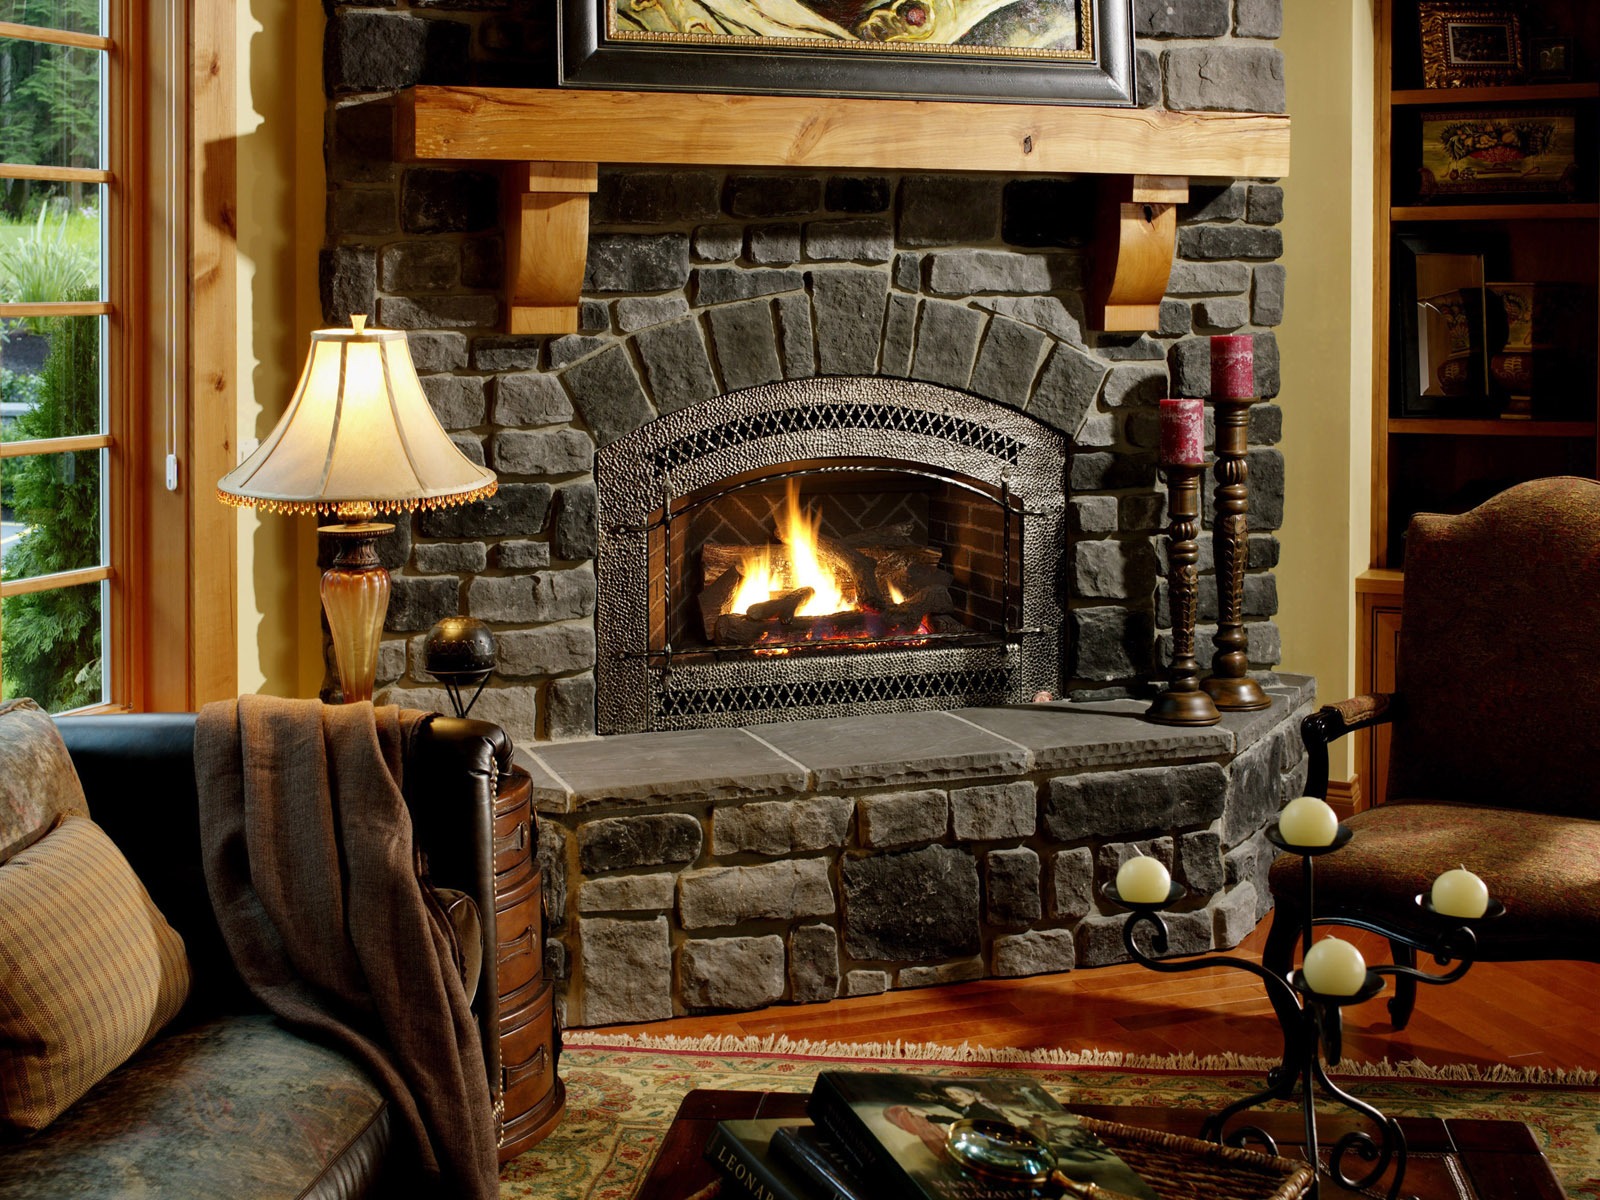 Western-style family fireplace wallpaper (1) #19 - 1600x1200